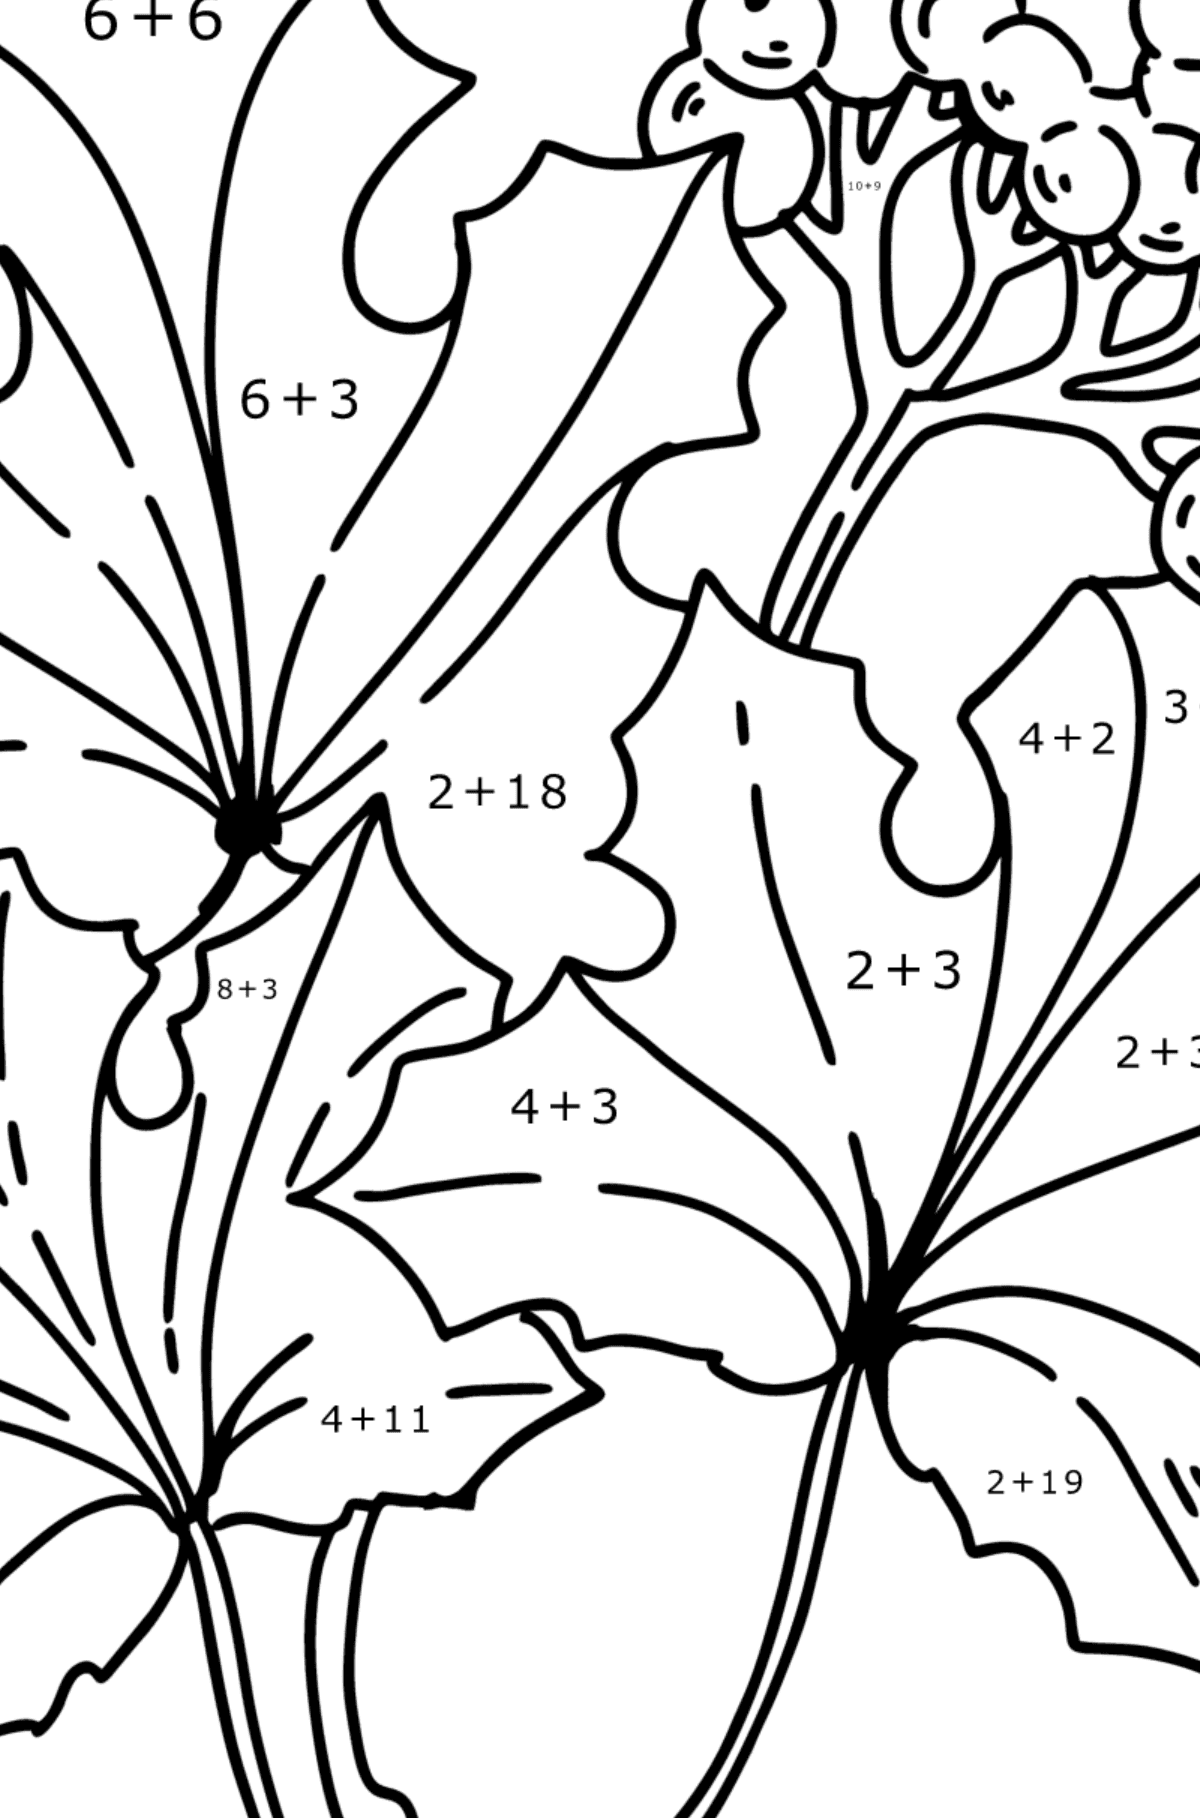 Coloring page - Maple Leaves and Elderberries - Math Coloring - Addition for Kids